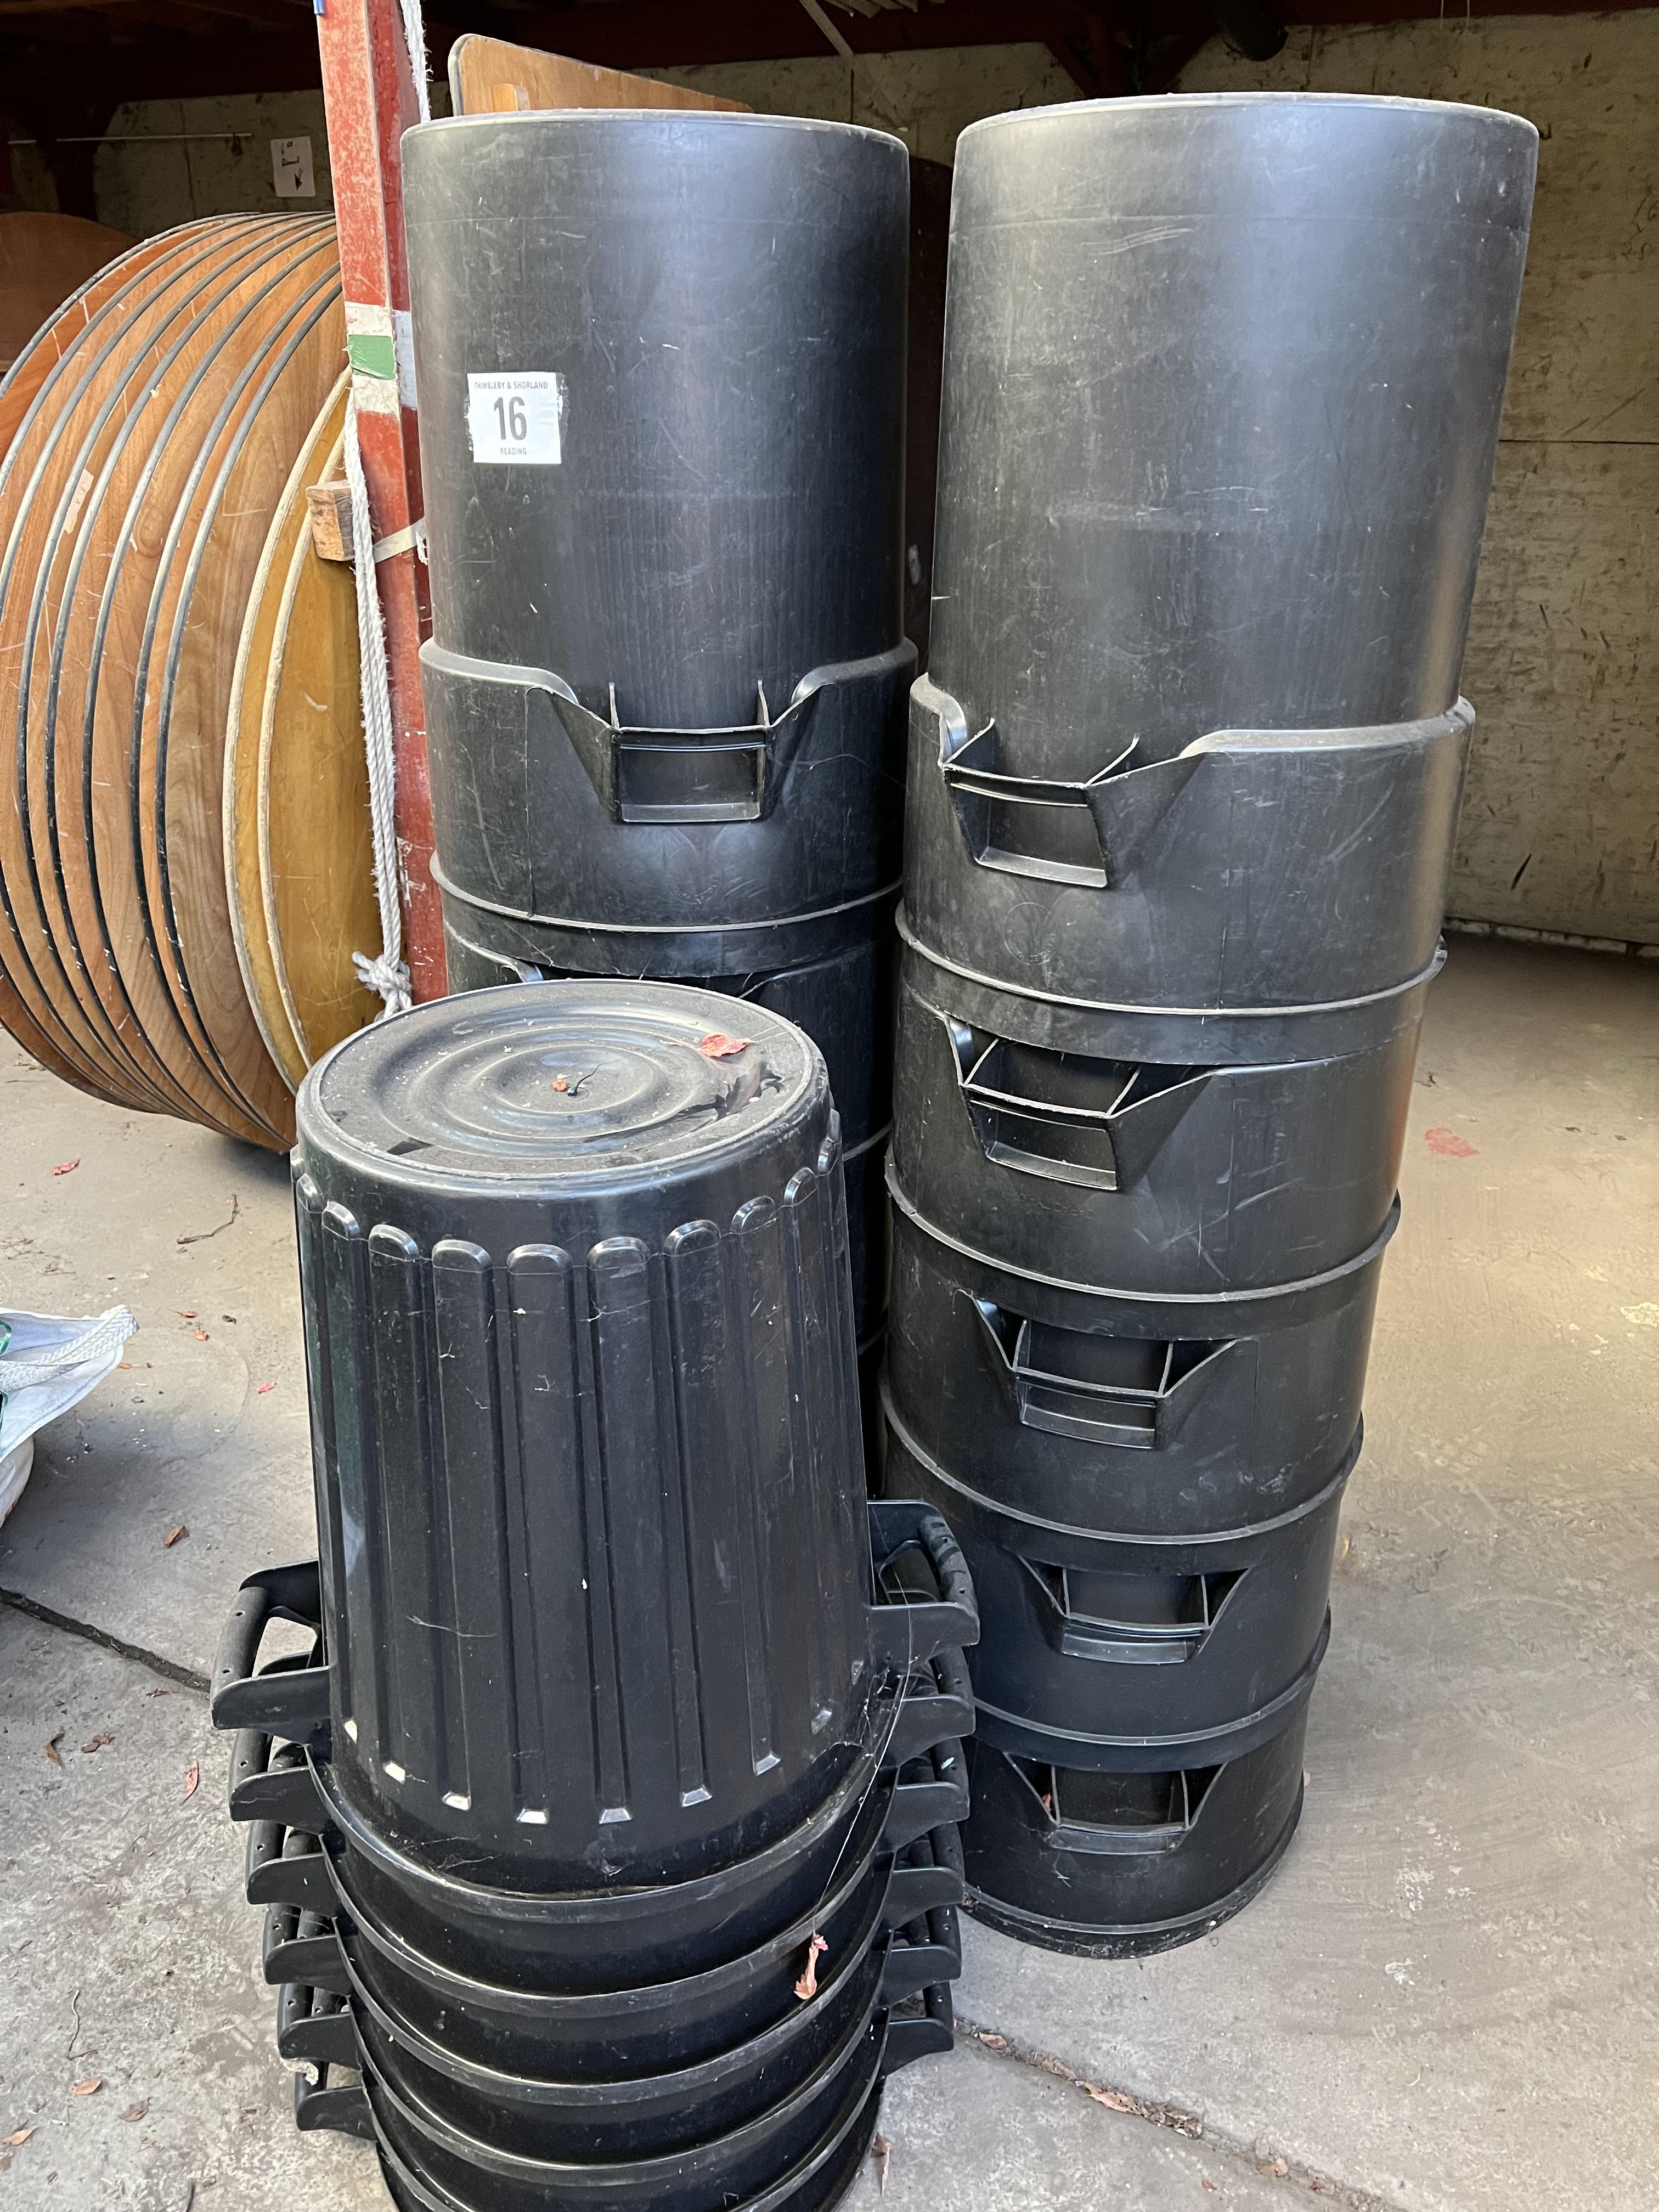 16 black plastic dust bins. This lot is subject to VAT. - Image 2 of 2